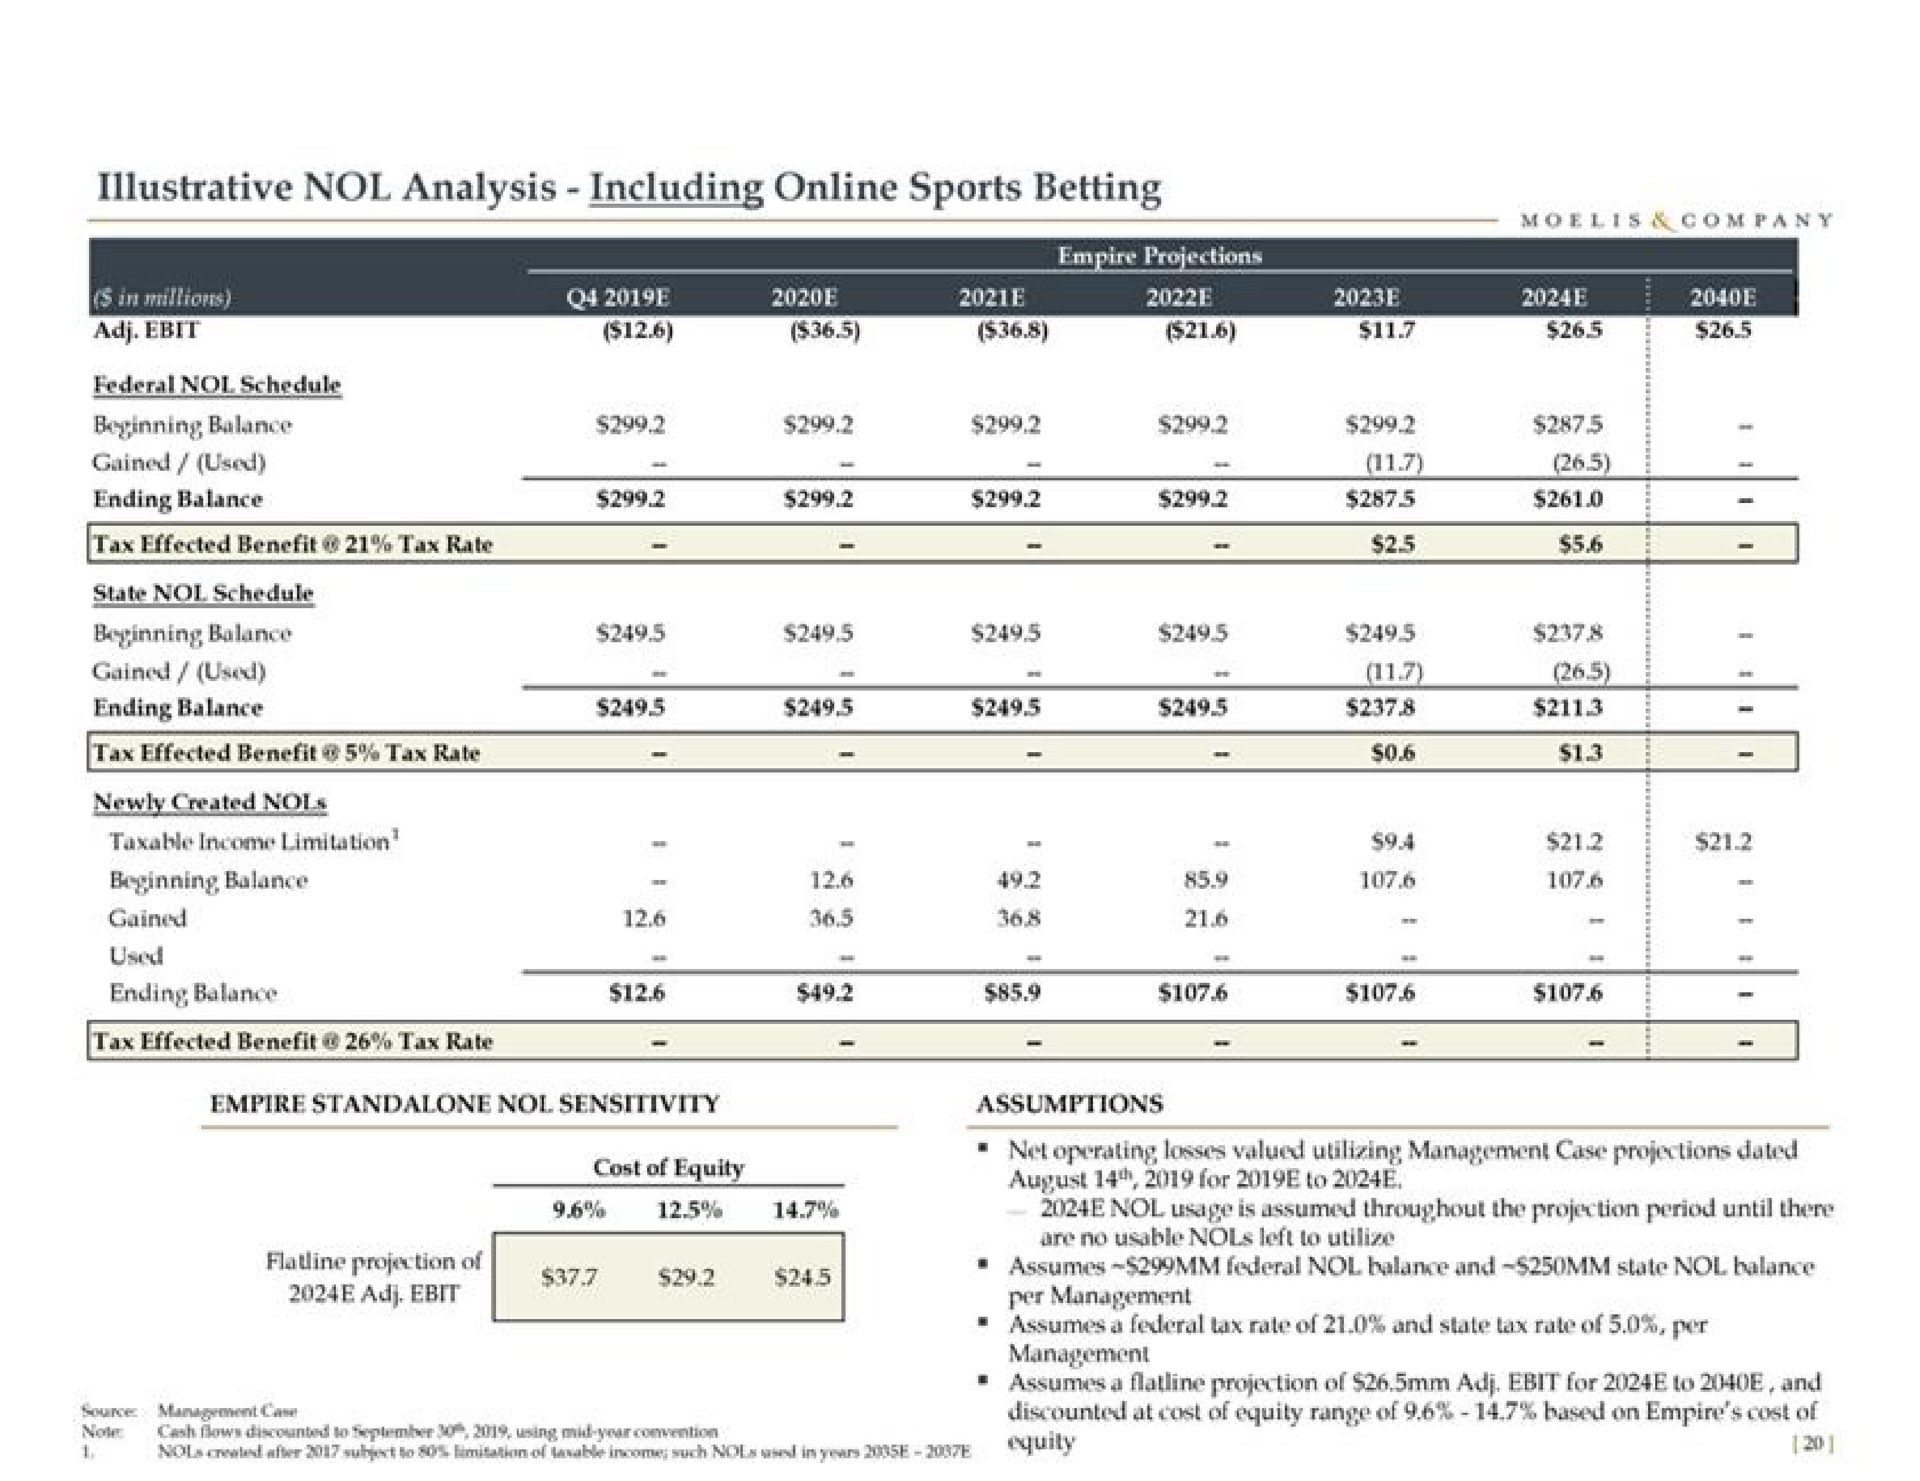 illustrative analysis including sports betting beginning balance tax effected benefit tax rate used i | Moelis & Company